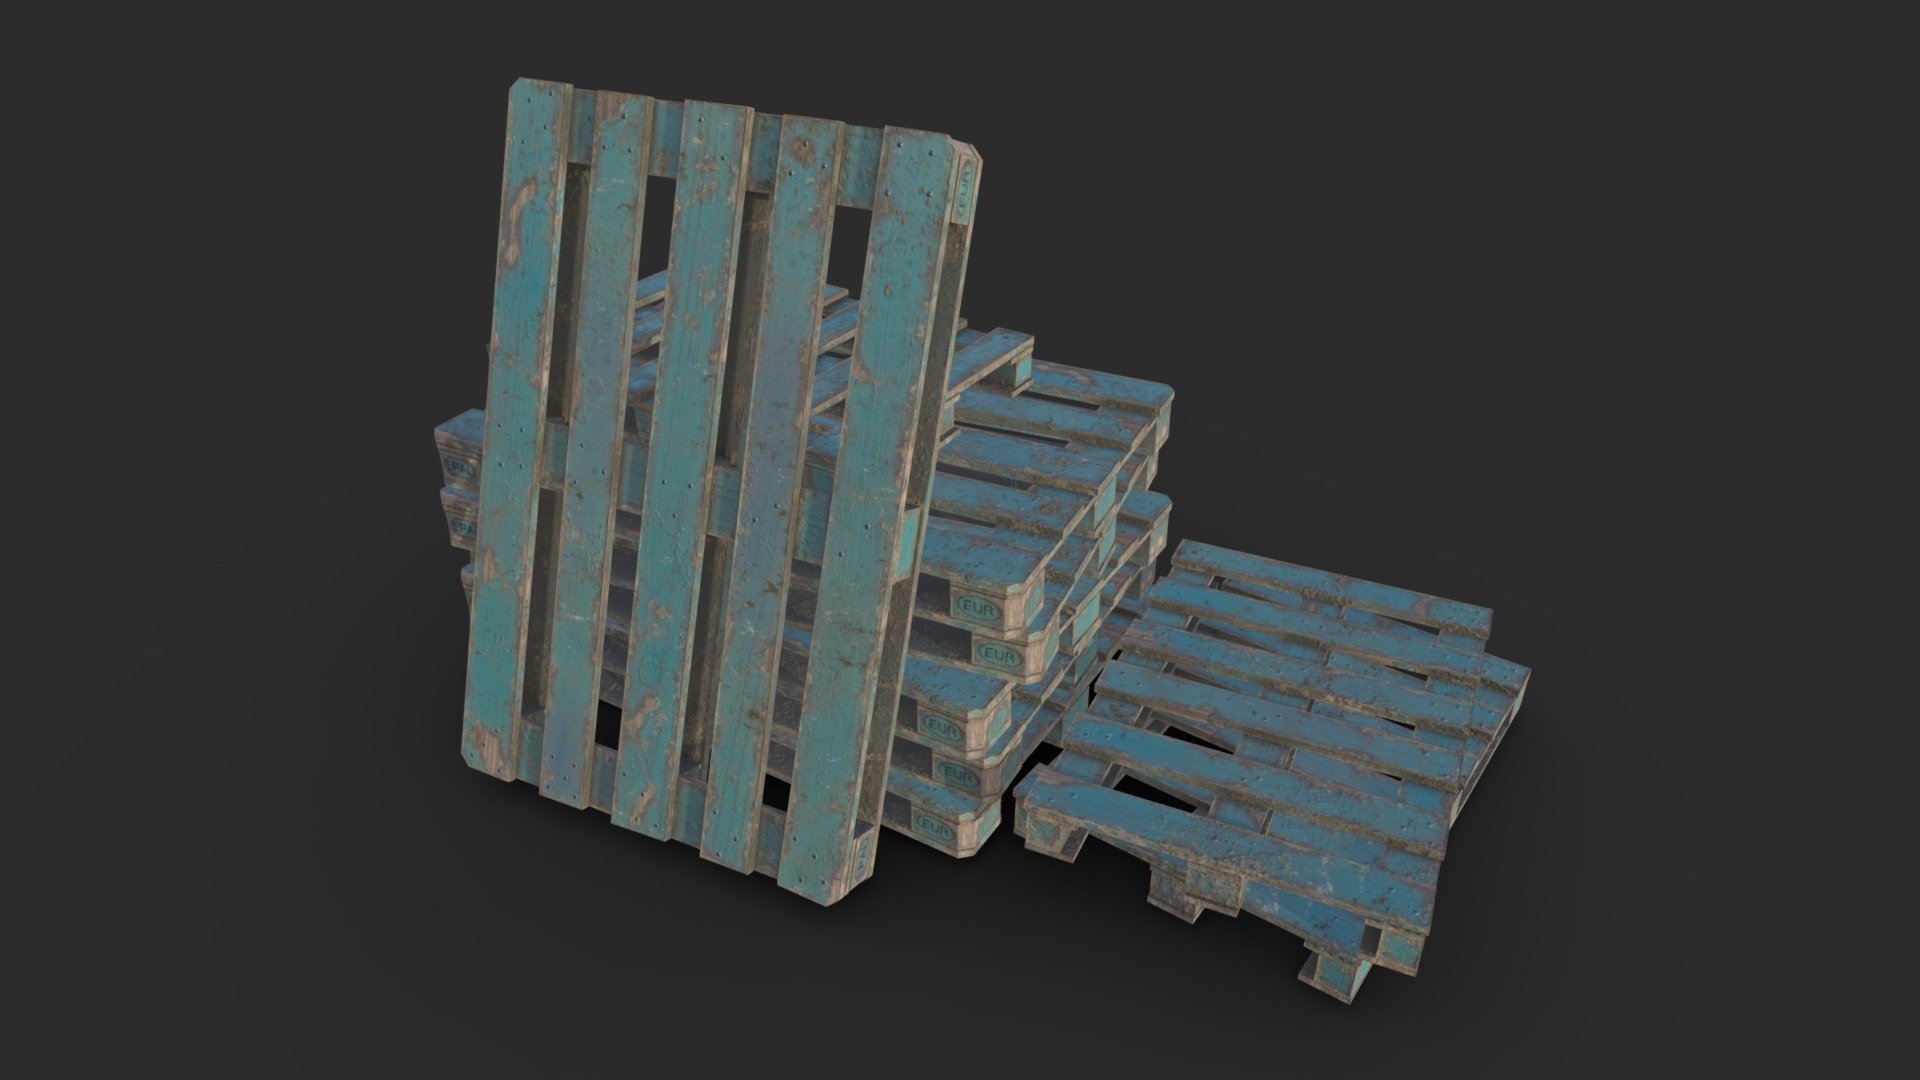 This asset includes 2 sizes of wooden pallets. A 1200 x 800 mm pallet (Eur-Epal) and an other to 880 x 620 mm (Dussledorf). The objects are available individually or in 4 pre-assembled assets. Also, the model includes 2 variants of the textures with an additional oil leaks textures set more.

This assets of pallets will embellish you scene and add more details which can help the gameplay and the game-design.

The material of models is unique and ready for PBR.

Low-poly model &amp; Blender native 2.81

SPECIFICATIONS




Objects : 2

Polygons : 310

Subdivision ready : Yes

Render engine : Eevee (Cycles ready)

GAME SPECS




LODs : Yes (inside FBX for Unity and FBX for Unreal only)

Numbers of LODs : 3

Collider : No

EXPORTED FORMATS




FBX

Collada

OBJ

GLTF

TEXTURES




Materials in scene : 2

Textures sizes : 2K

Textures types : Diffuse, Metallic, Roughness, Normal (DirectX &amp; OpenGL), Heigh and AO

Textures format : PNG

GENERAL

Real scale : Yes - Euro Pallets Assets 02 - Buy Royalty Free 3D model by KangaroOz 3D (@KangaroOz-3D) 3d model